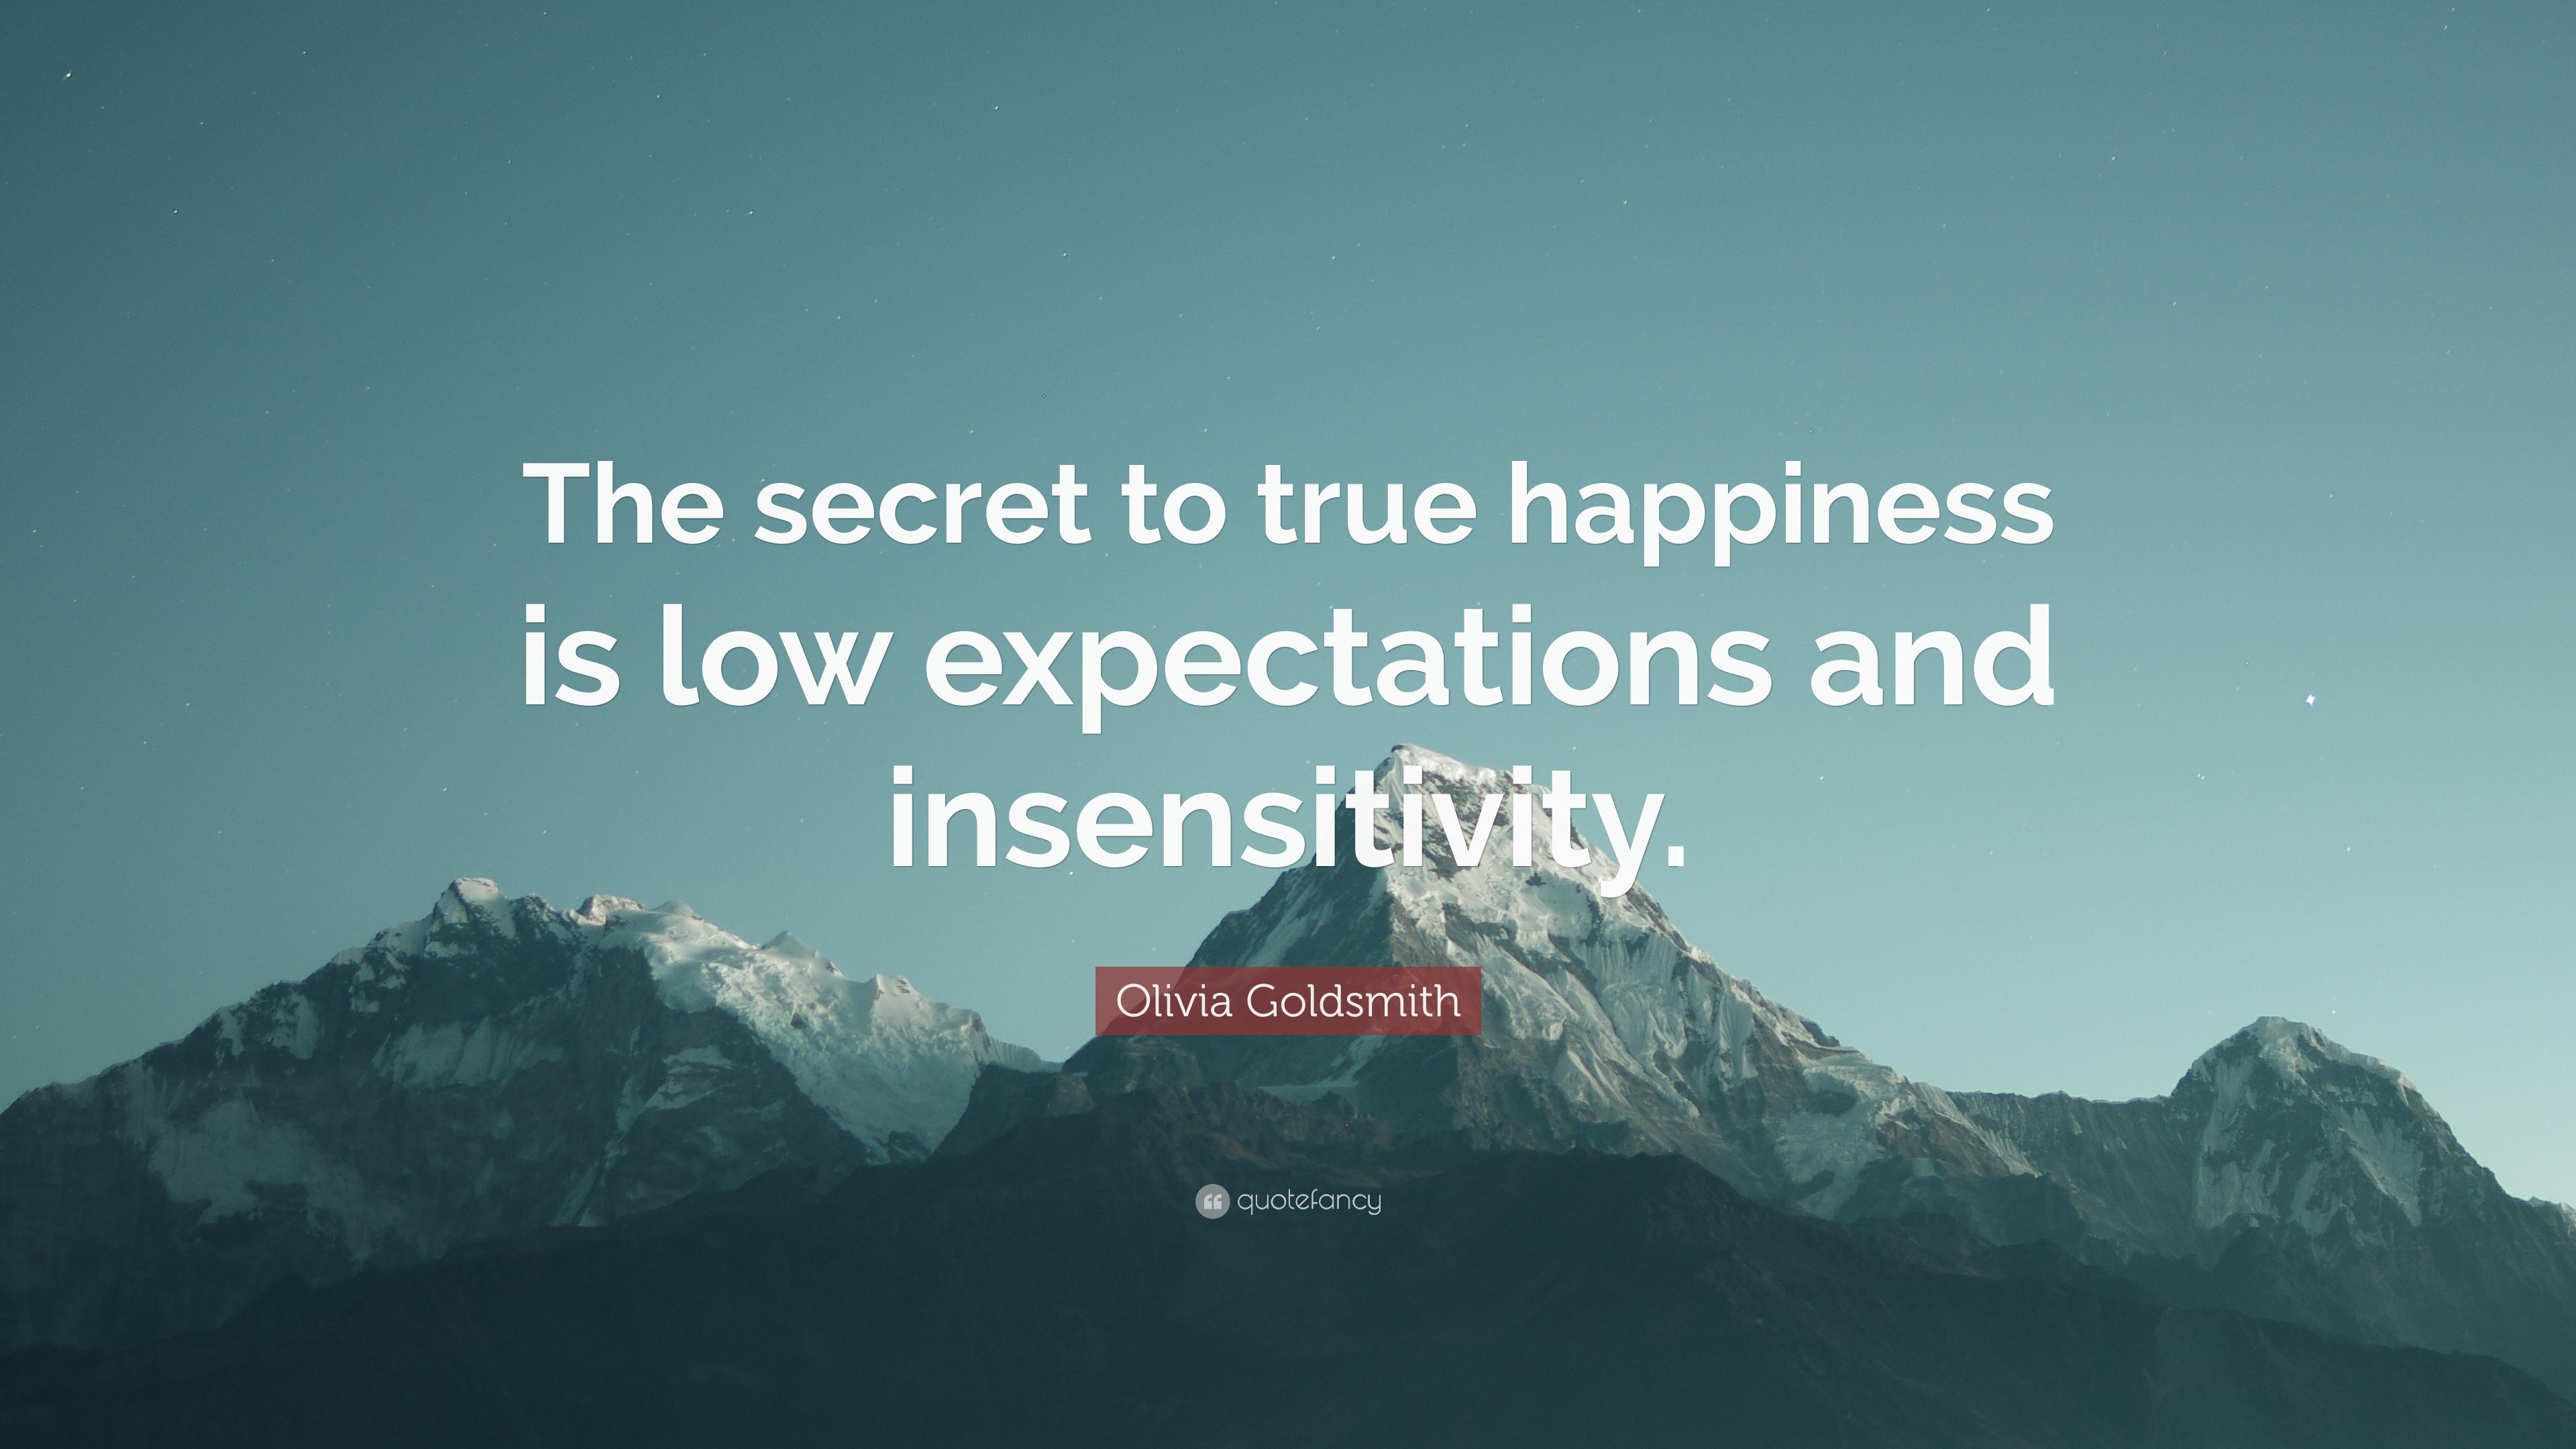 Olivia Goldsmith Quote: “The secret to true happiness is low